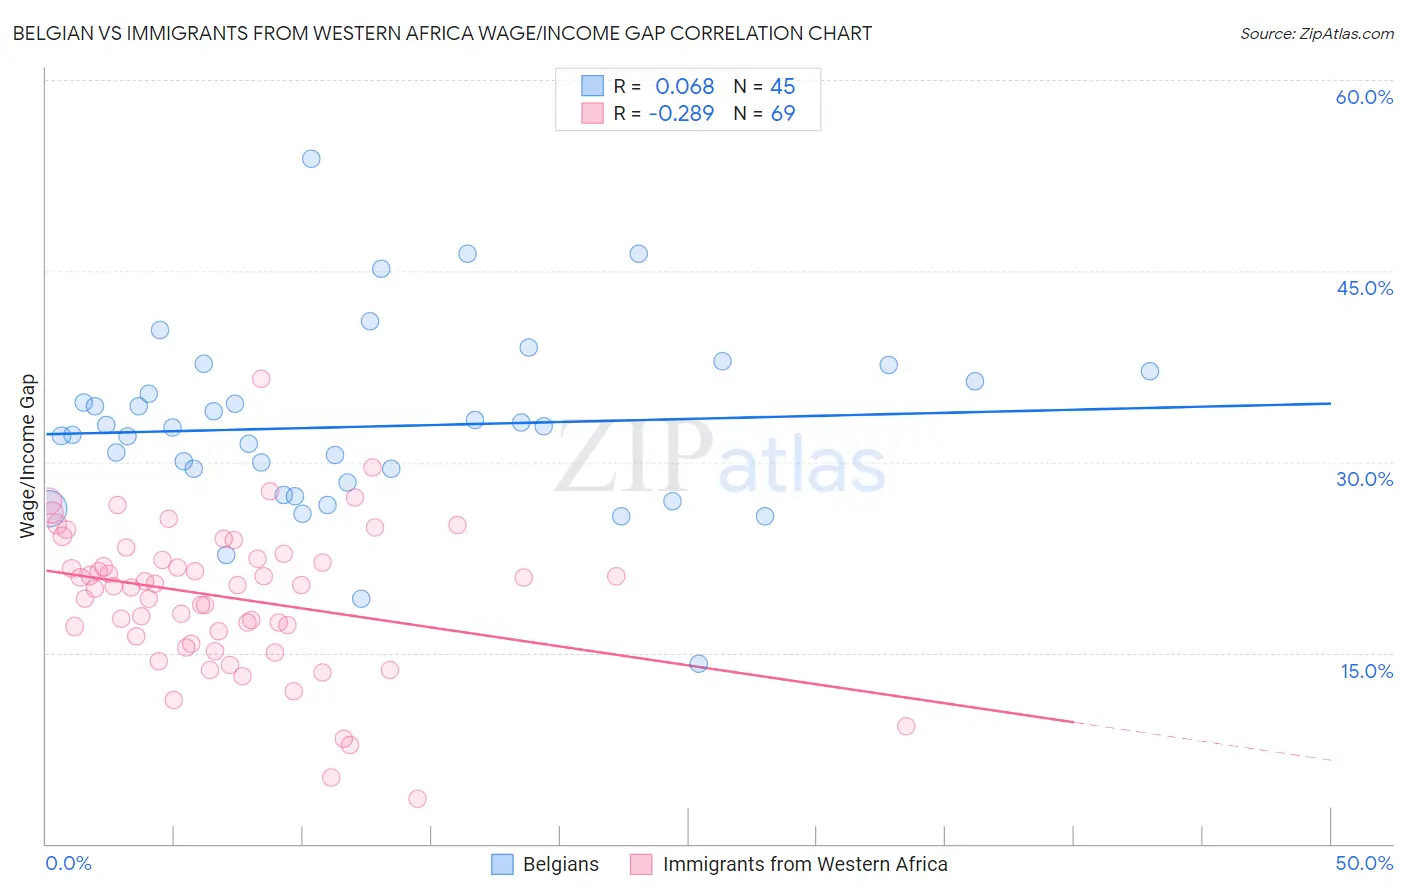 Belgian vs Immigrants from Western Africa Wage/Income Gap